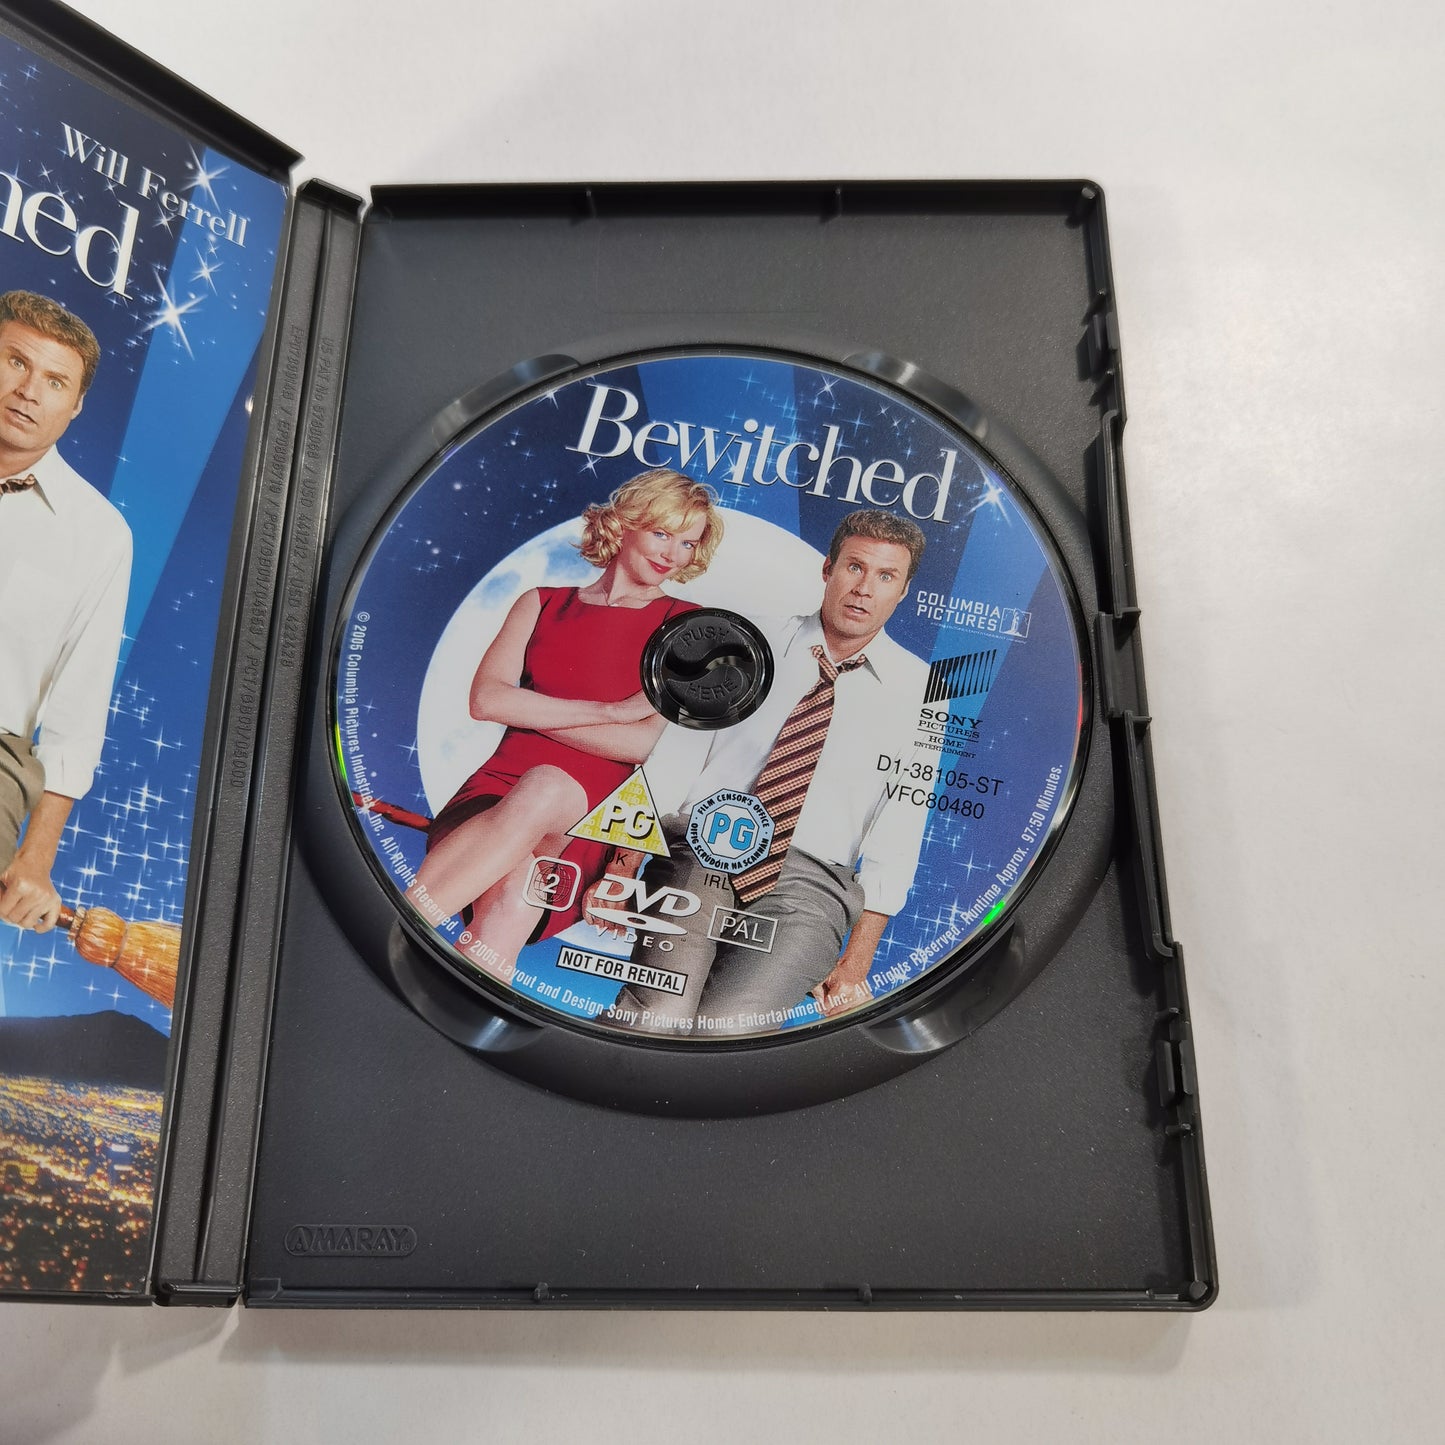 Bewitched (2005) - DVD UK 2005